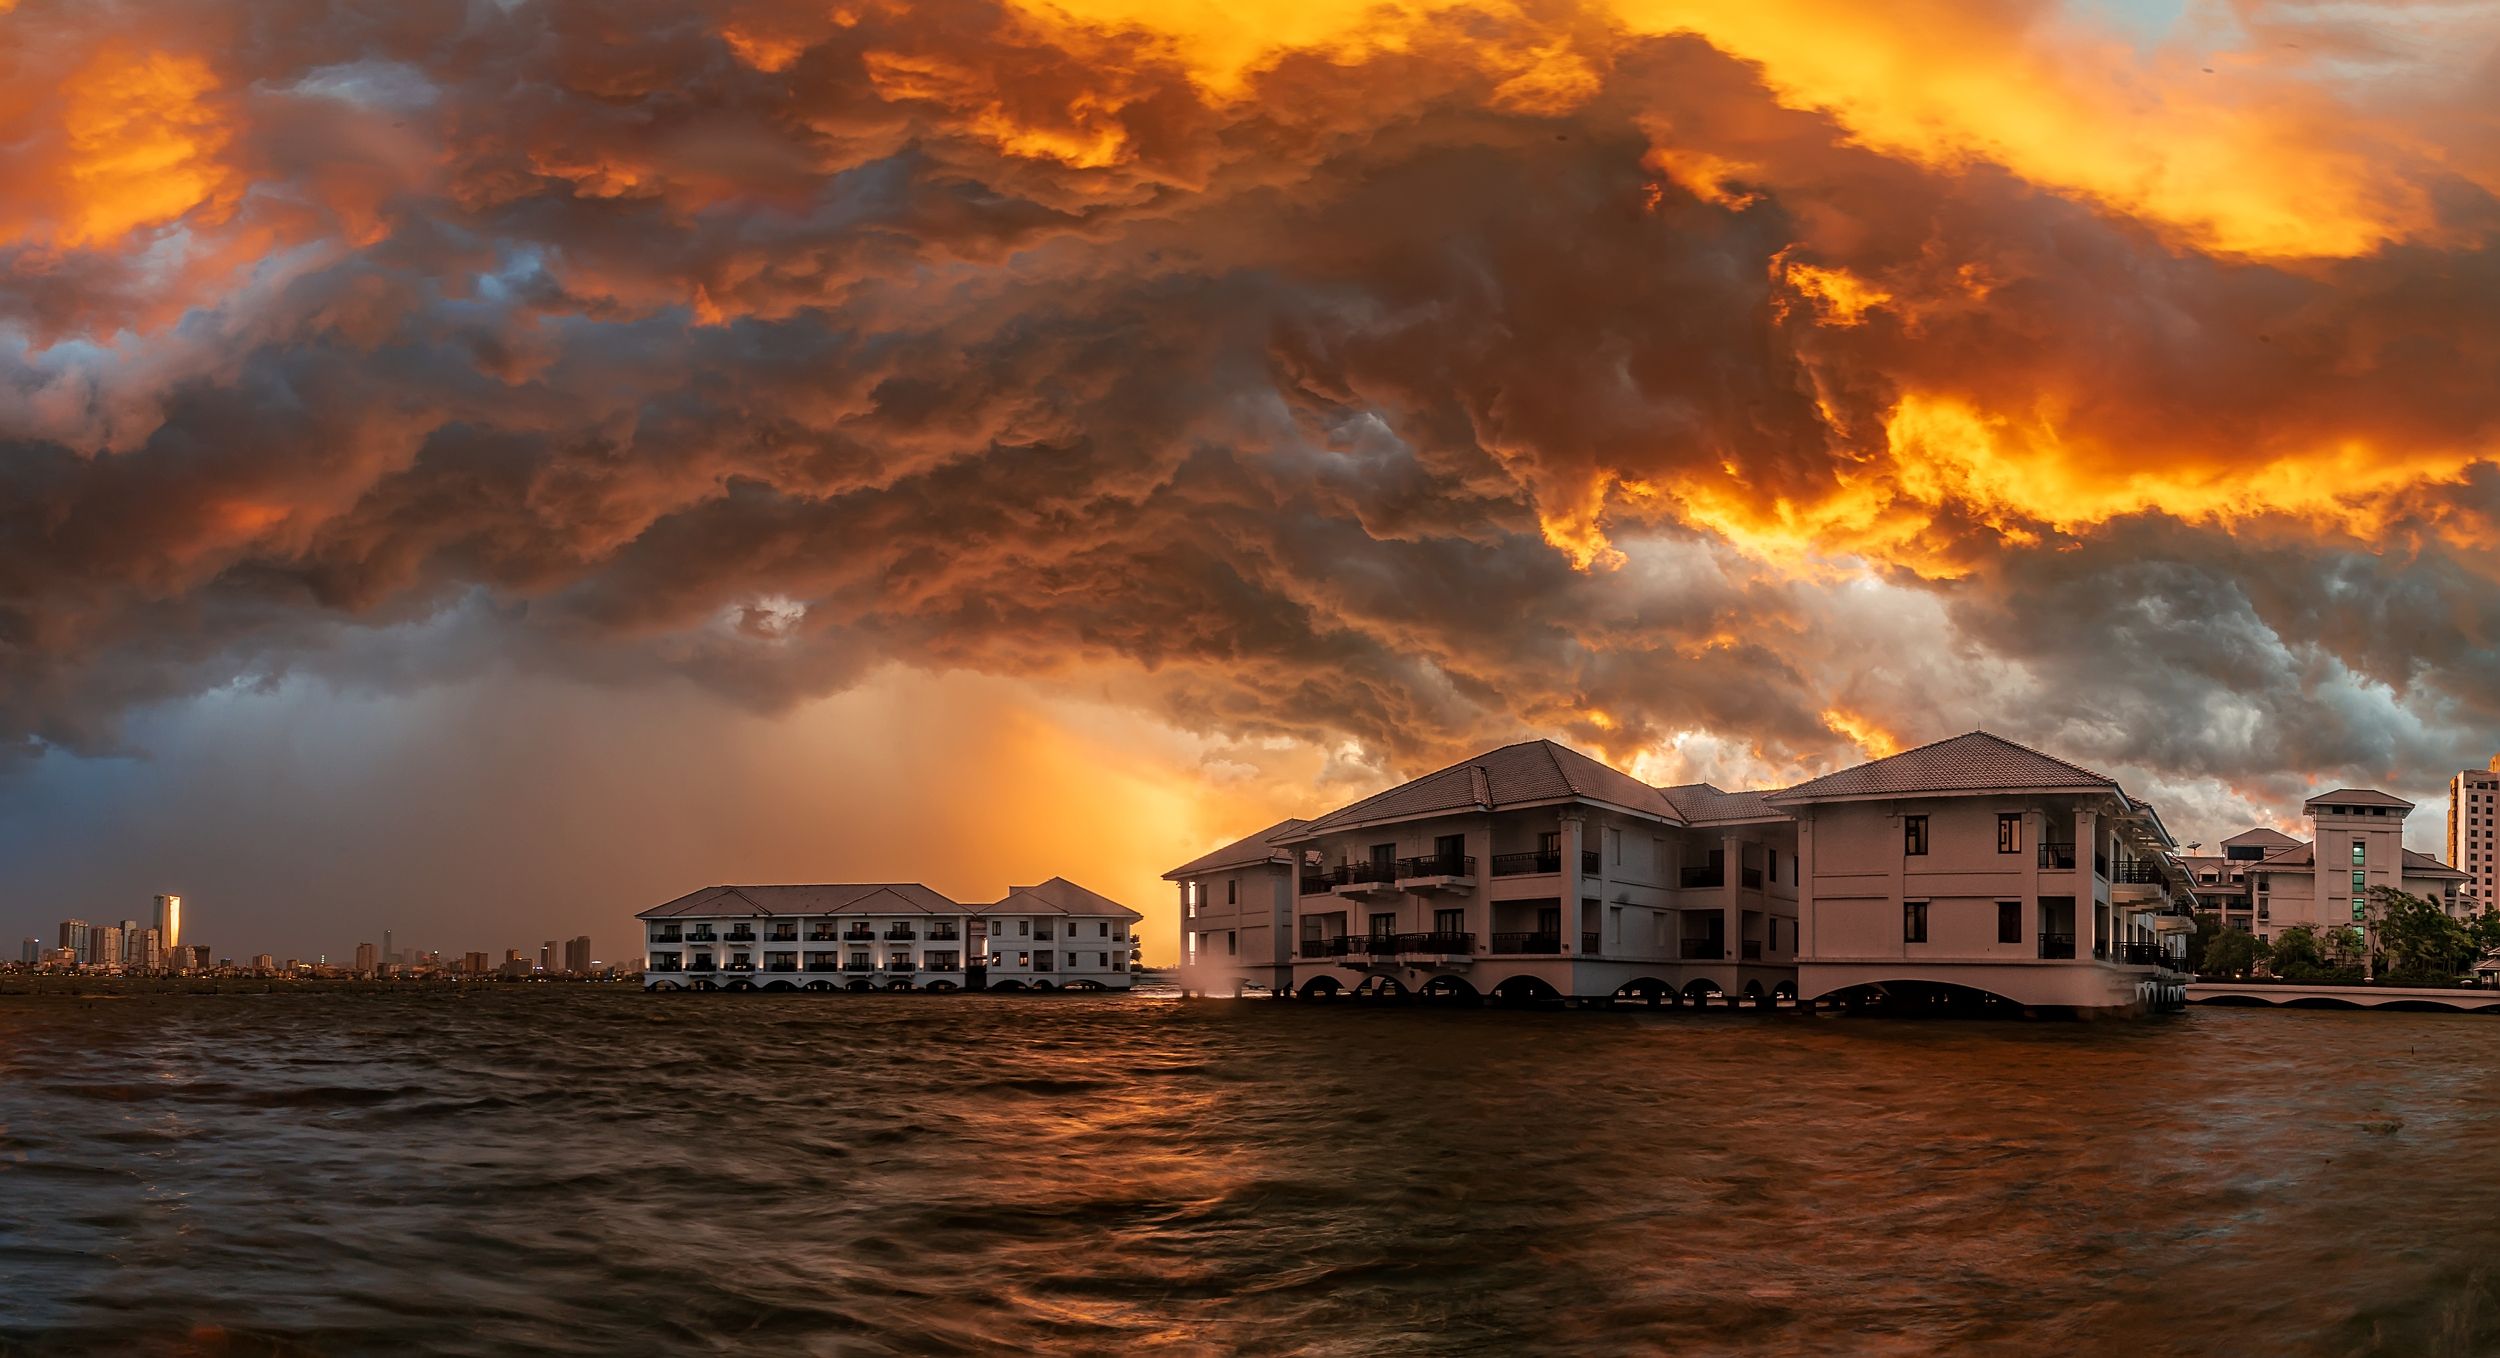 sunset, architecture, storm, Anh Tuấn Trần